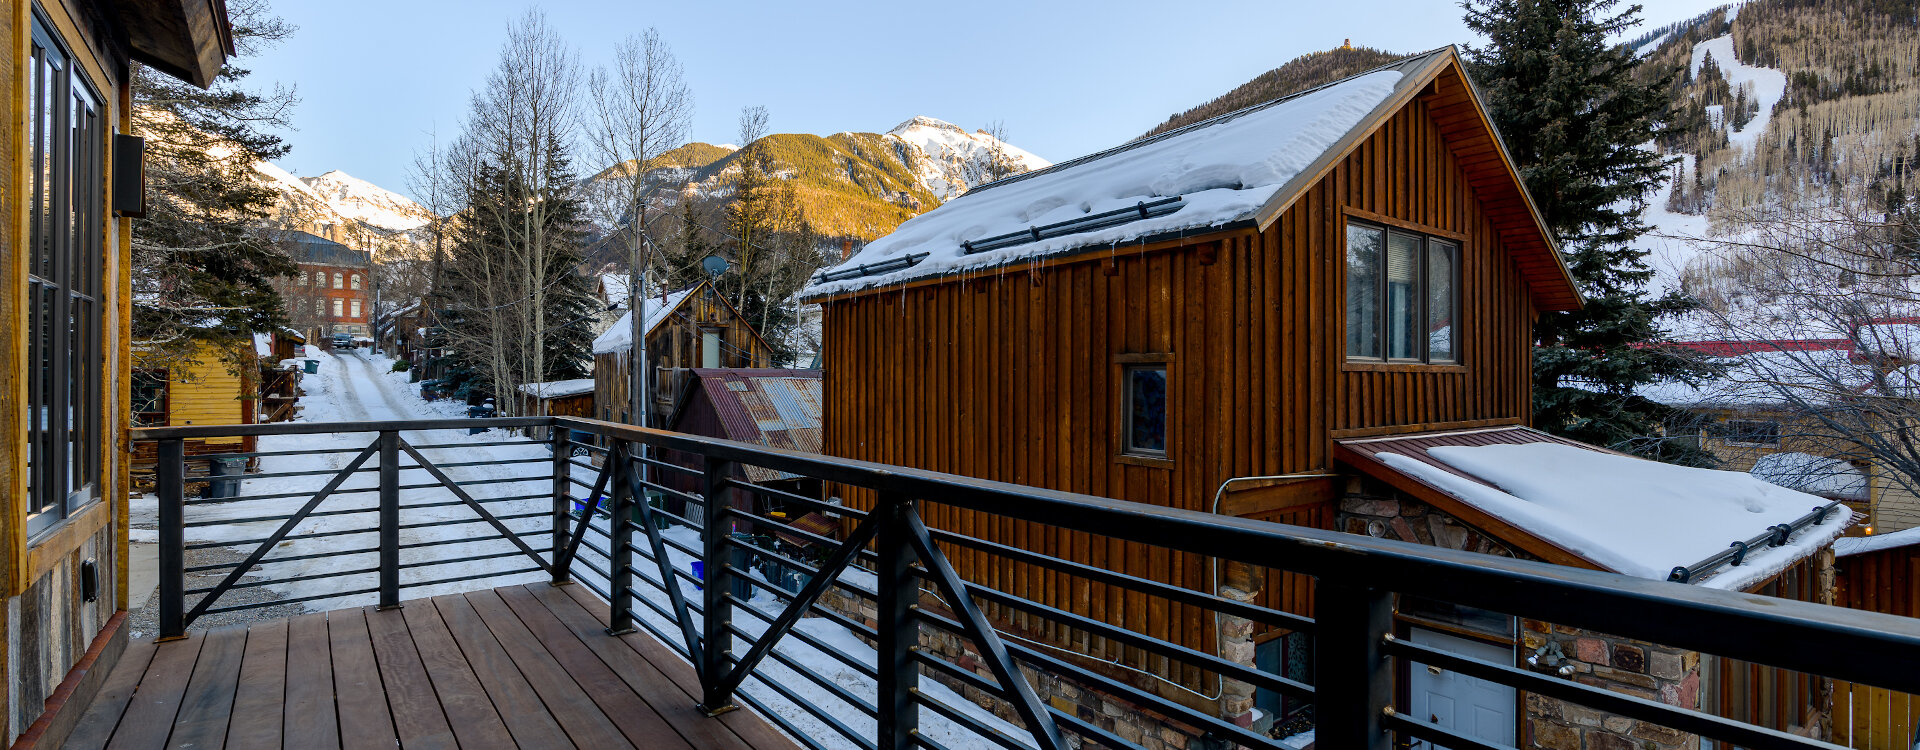 5.0-telluride-the-treehouse-deck